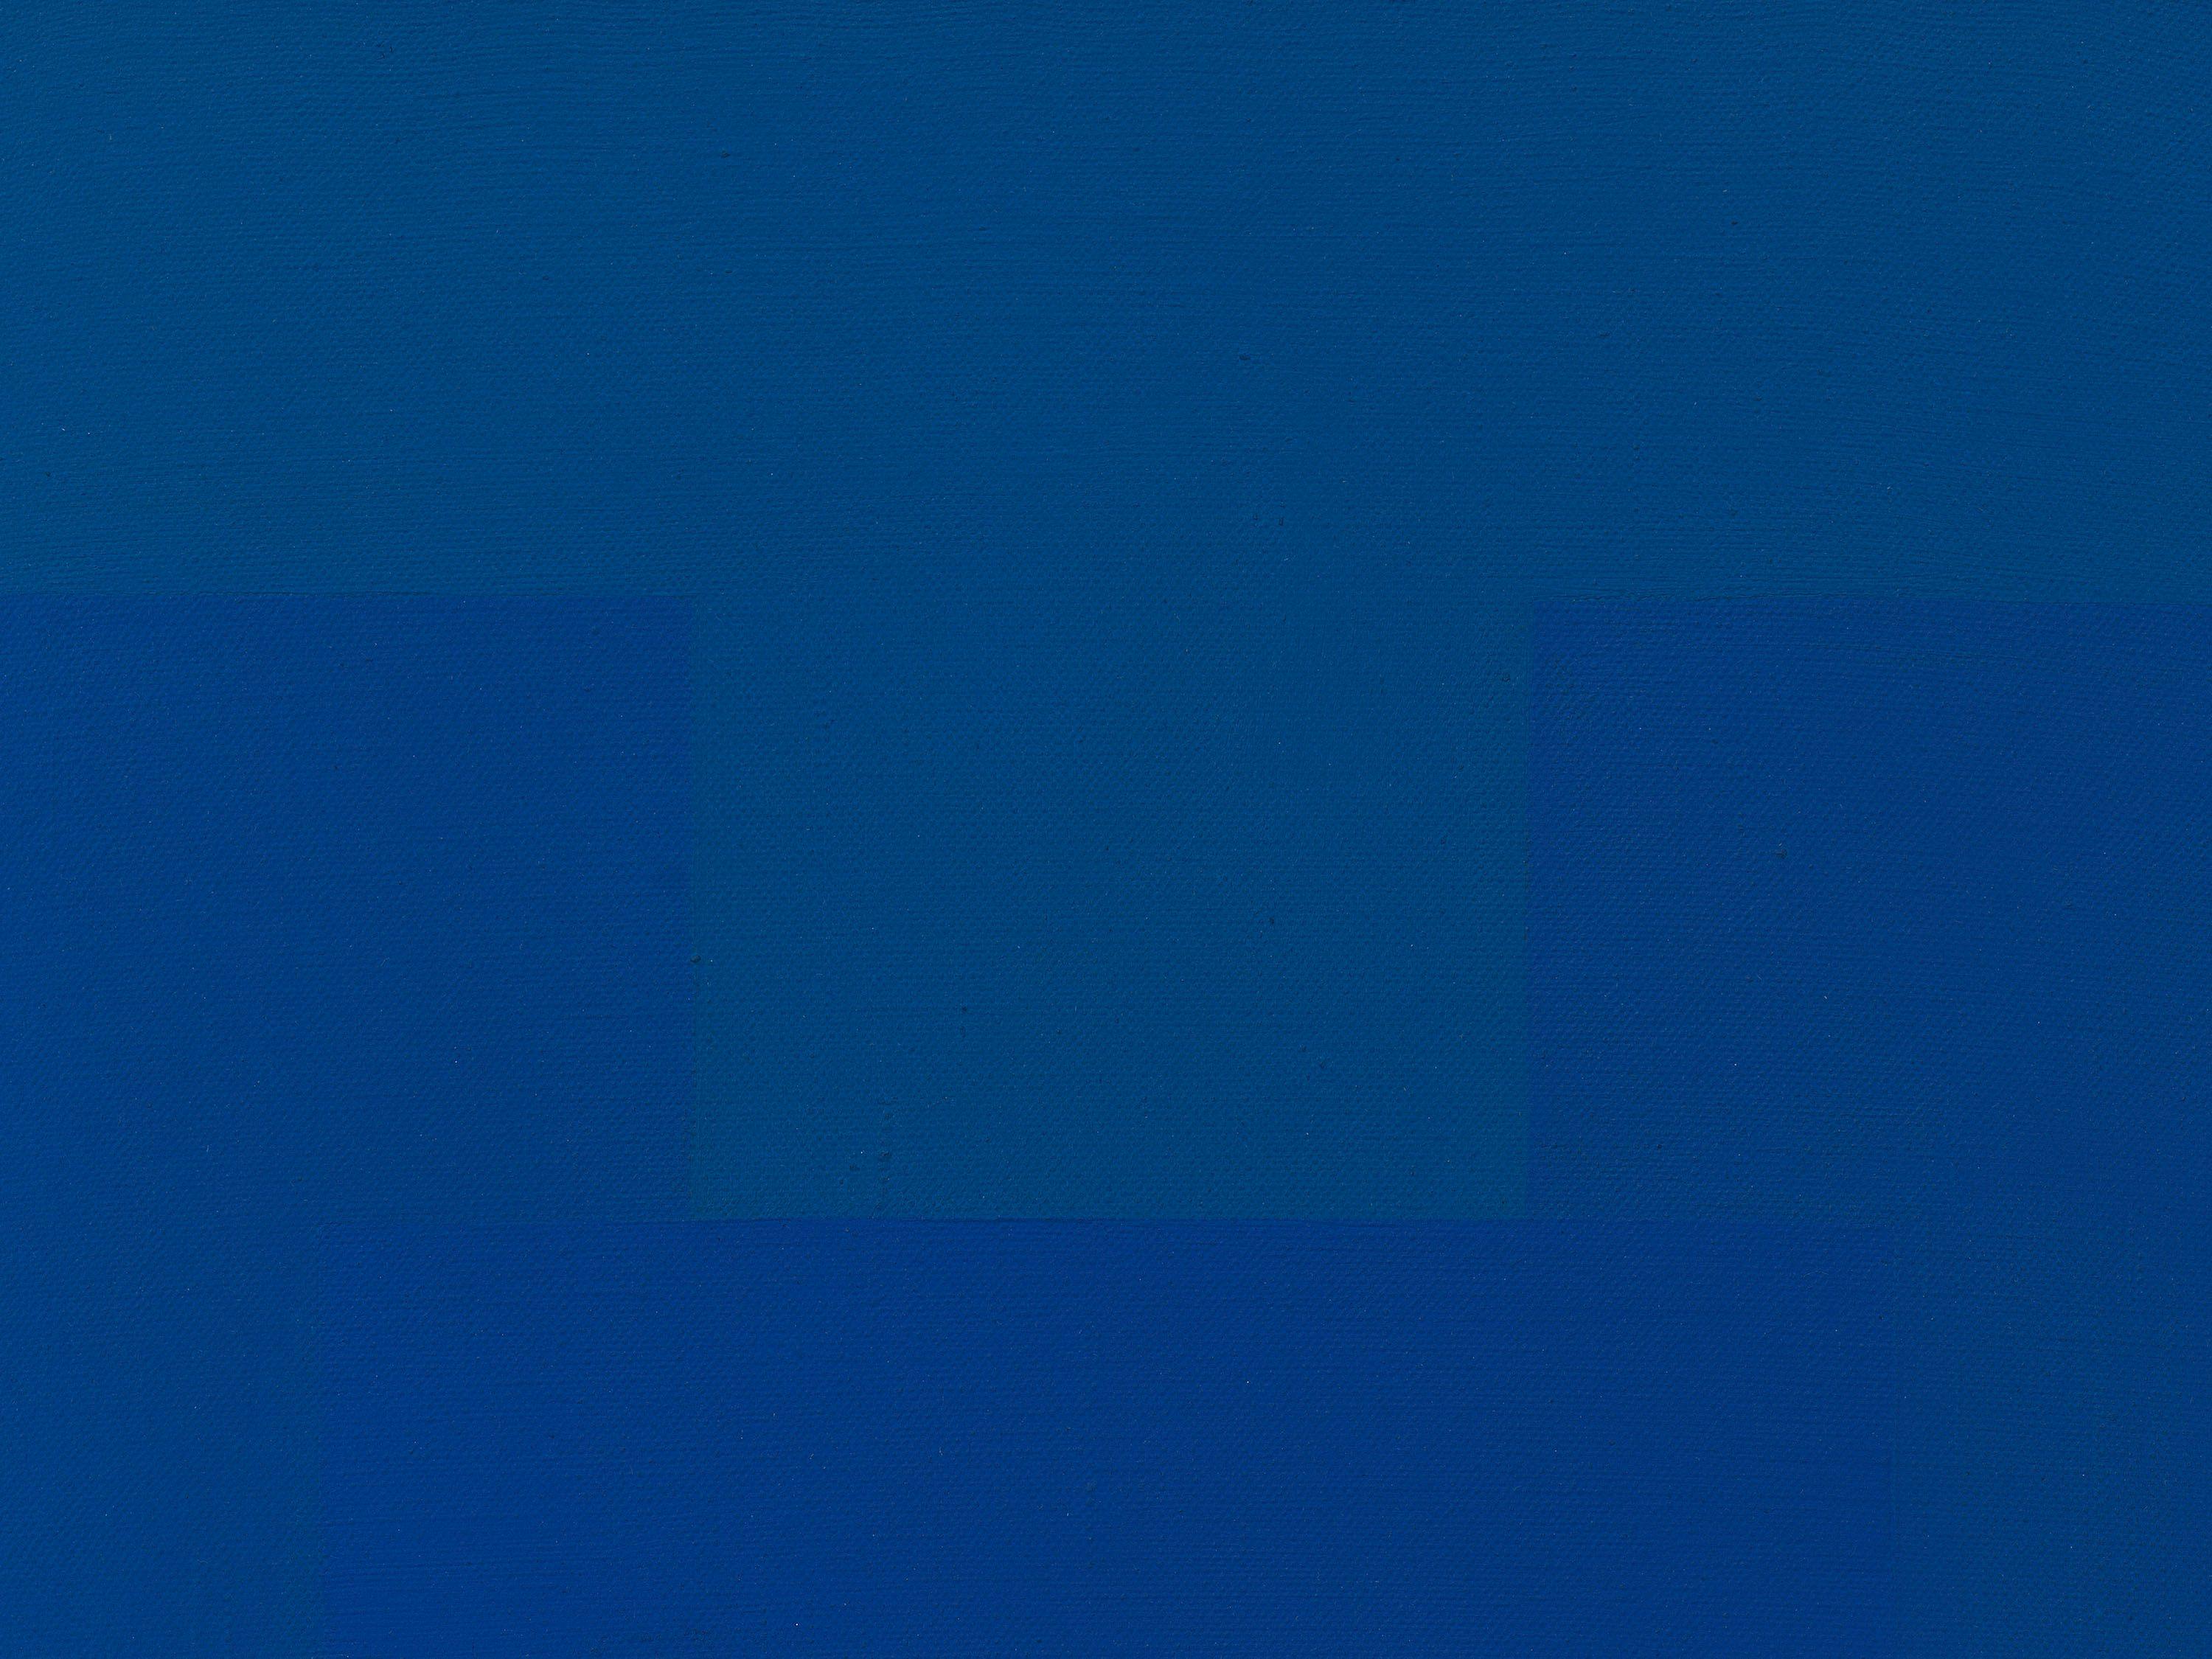 A detail from a painting by Ad Reinhardt, titled Blue Painting, dated 1953.